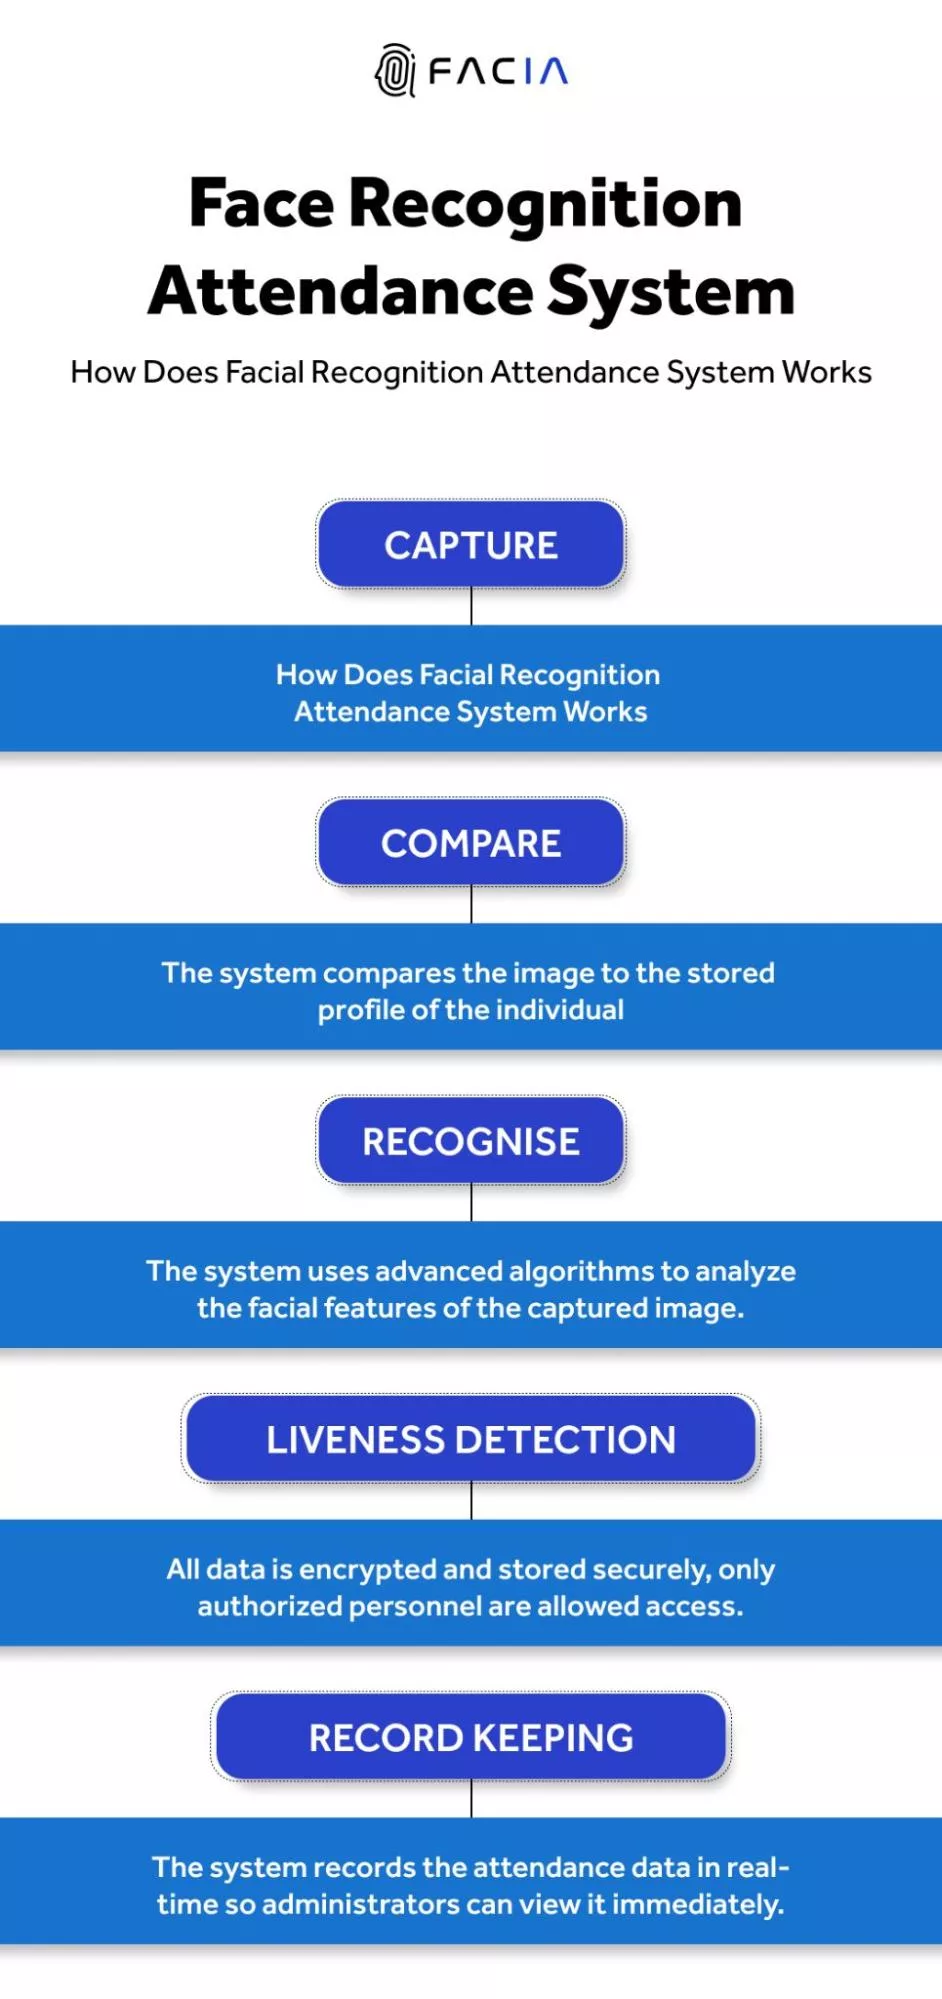 How Does Face Recognition Attendance System Work?